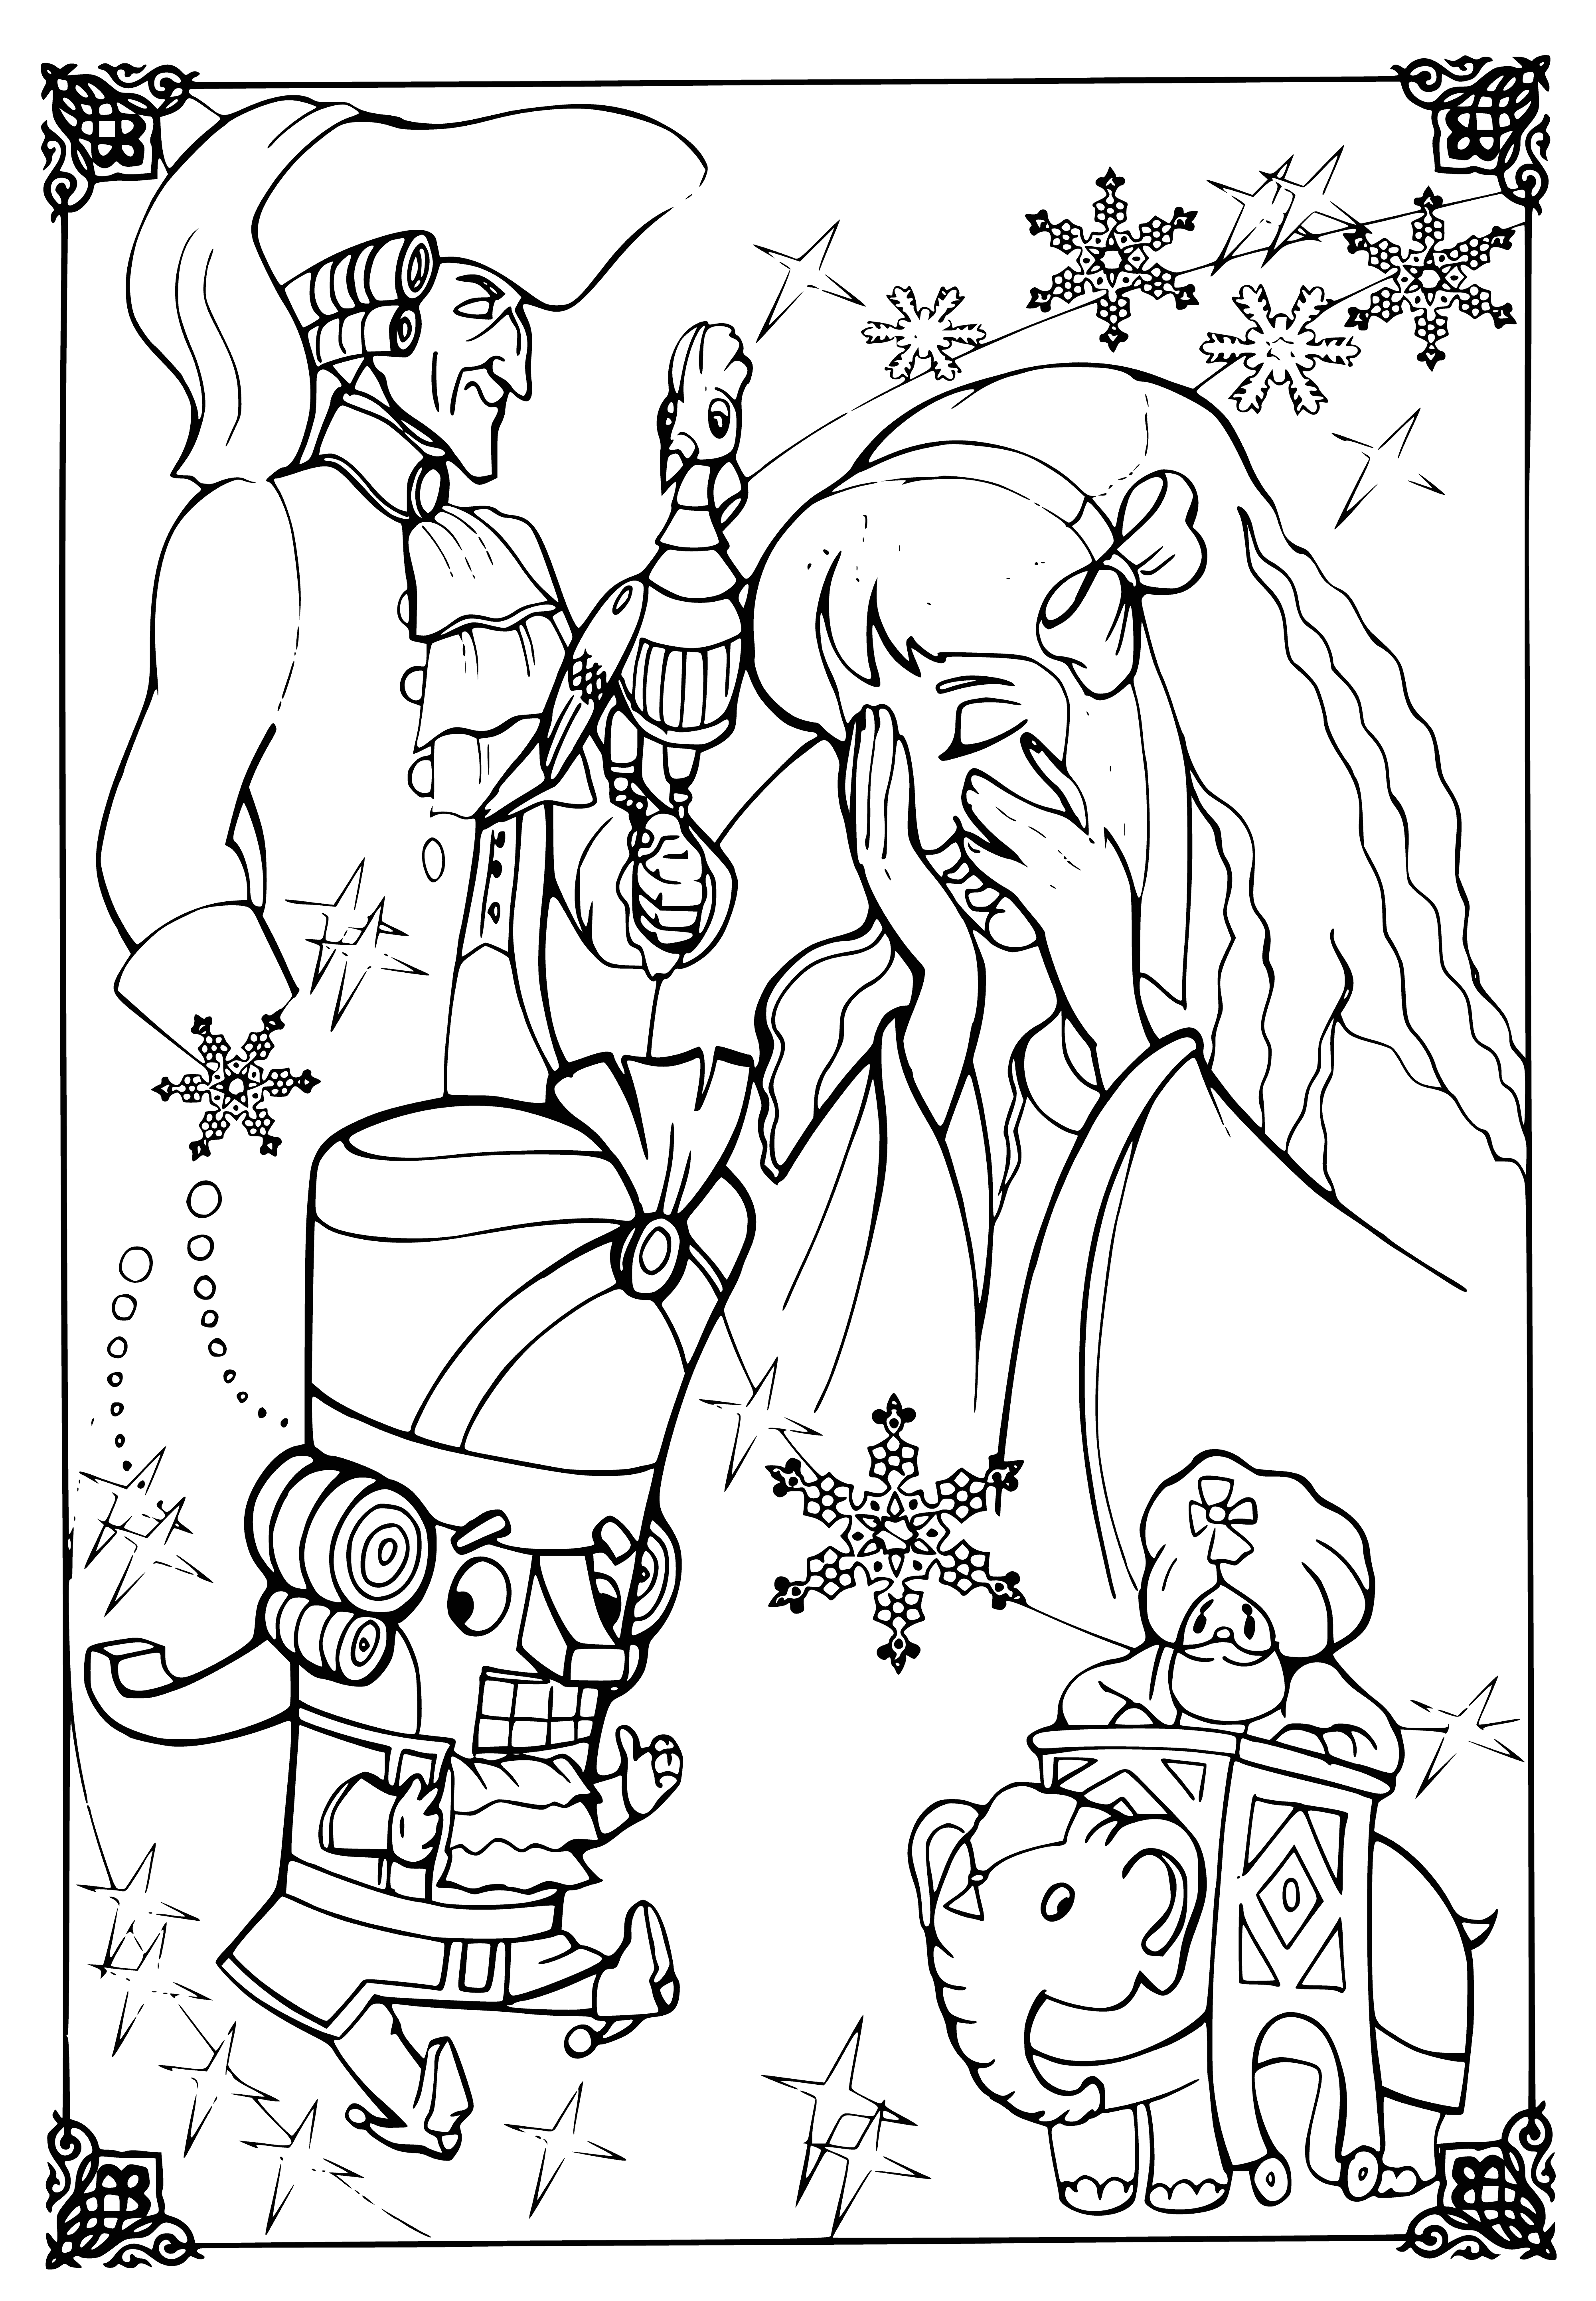 coloring page: Boy holding nutcracker man in red coat and hat; he has white beard & mustache and is holding a sword.